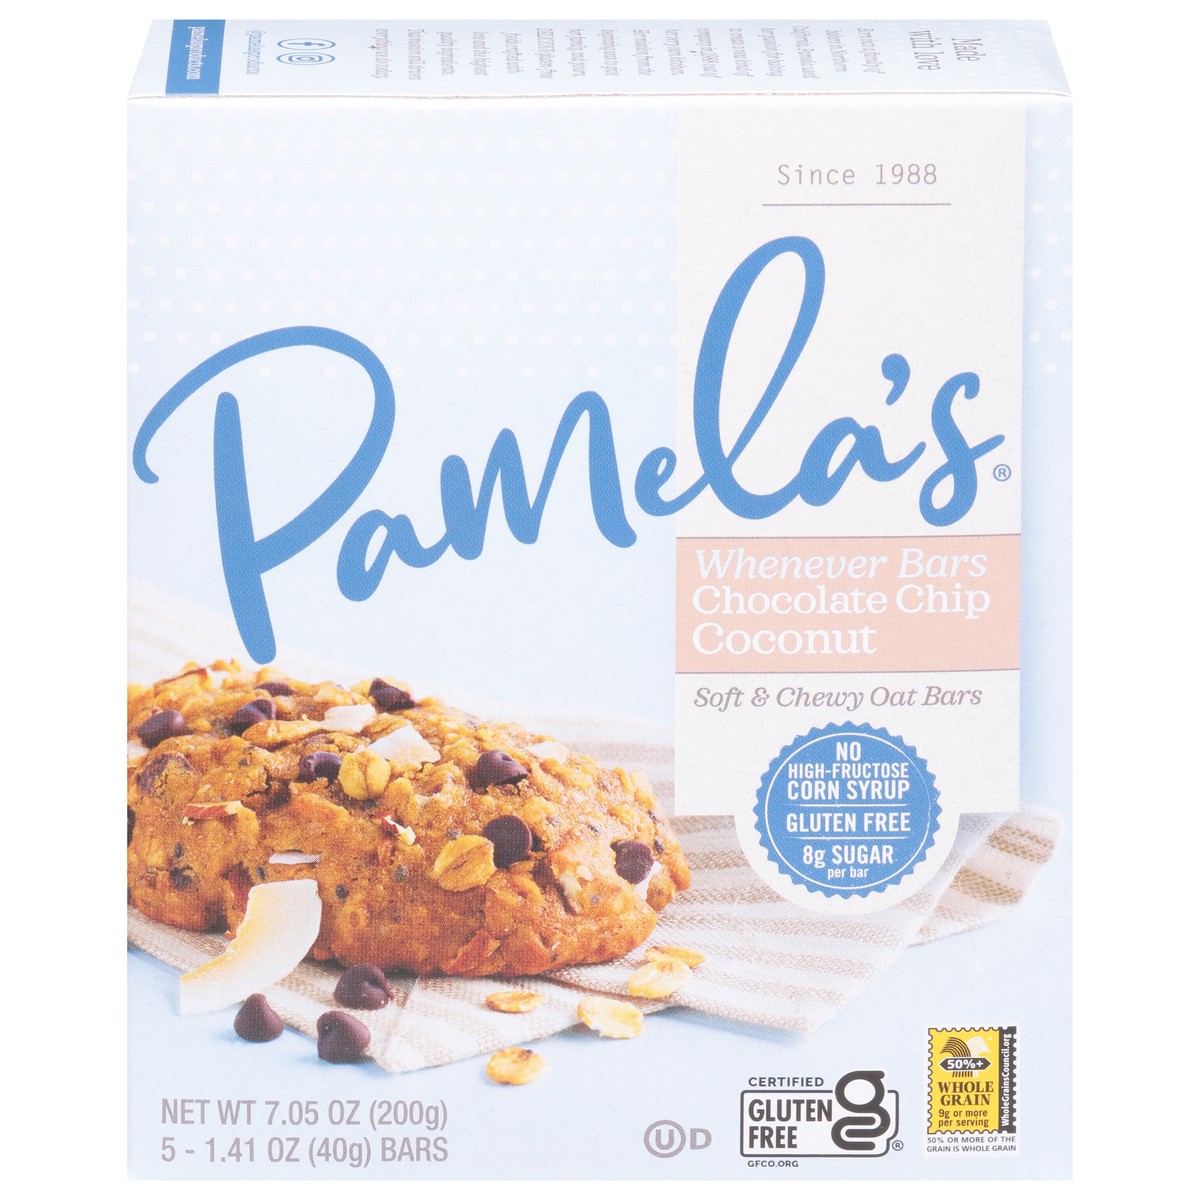 slide 1 of 9, Pamela's Whenever Bars Soft & Chewy Chocolate Chip Coconut Oat Bars 5 - 1.41 oz Bars, 7.05 oz